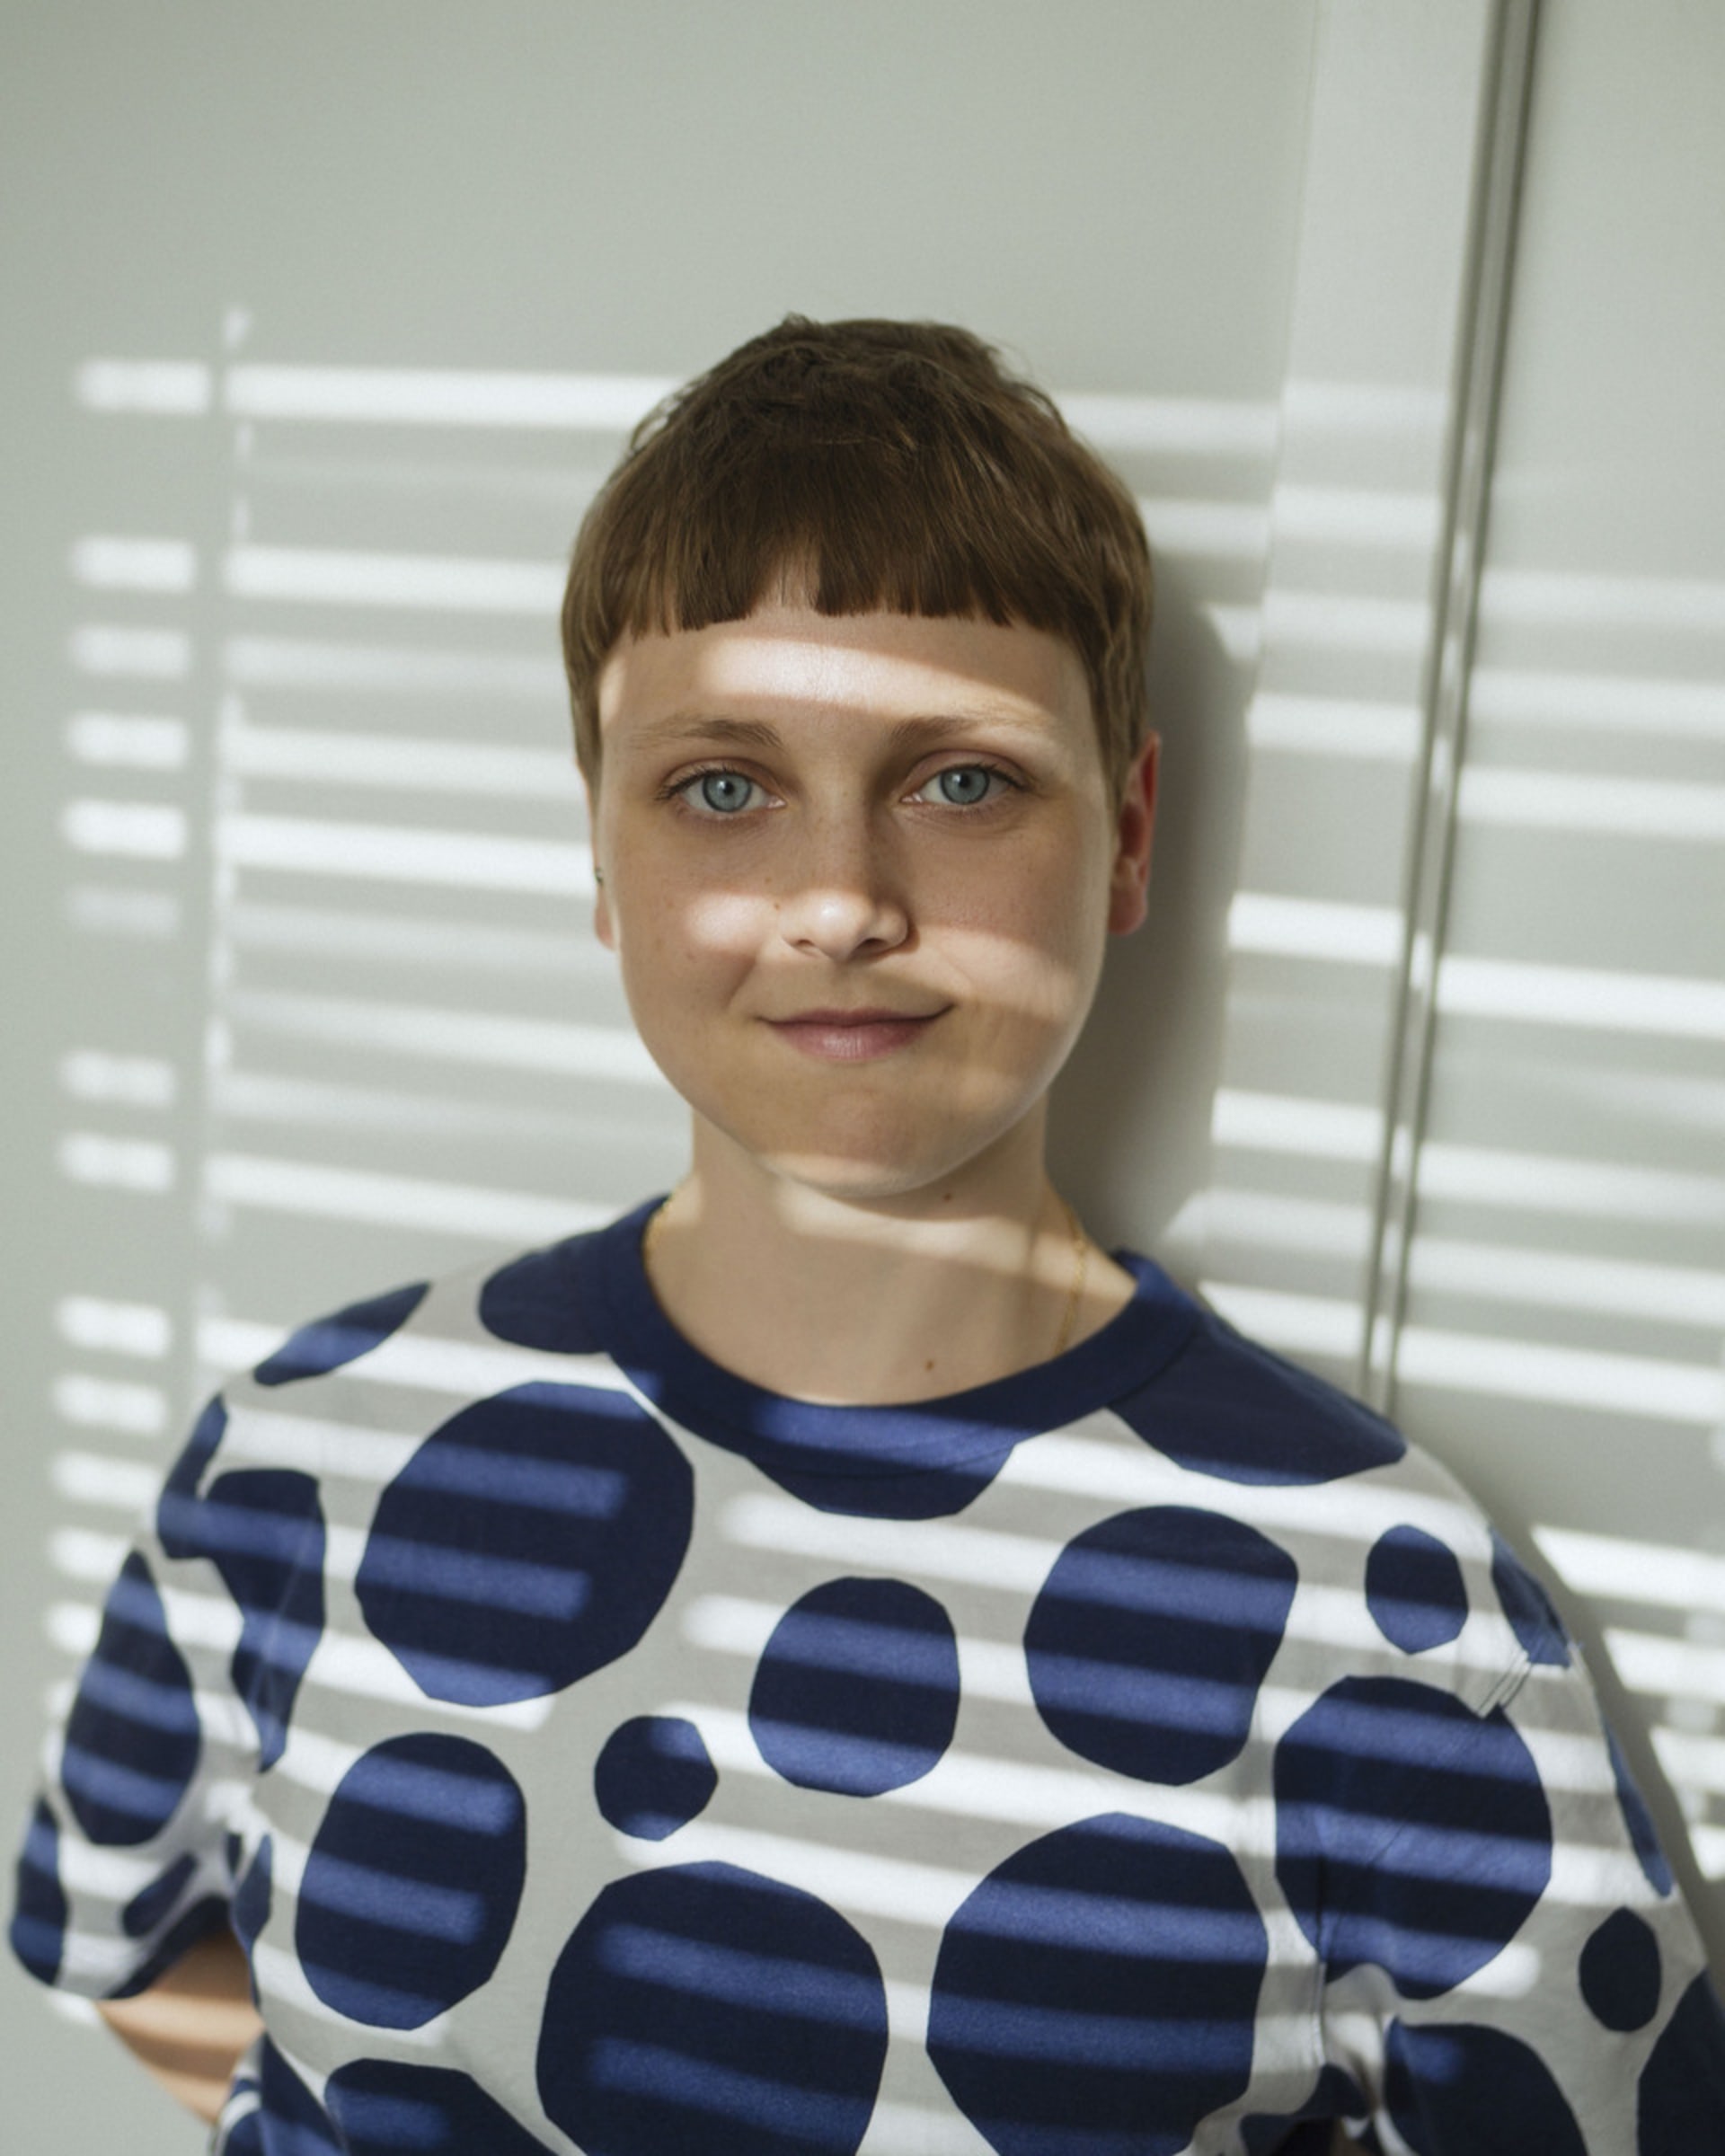 Nicci is a white person with short hair, shown smiling in blue and white polka dot t shirt.